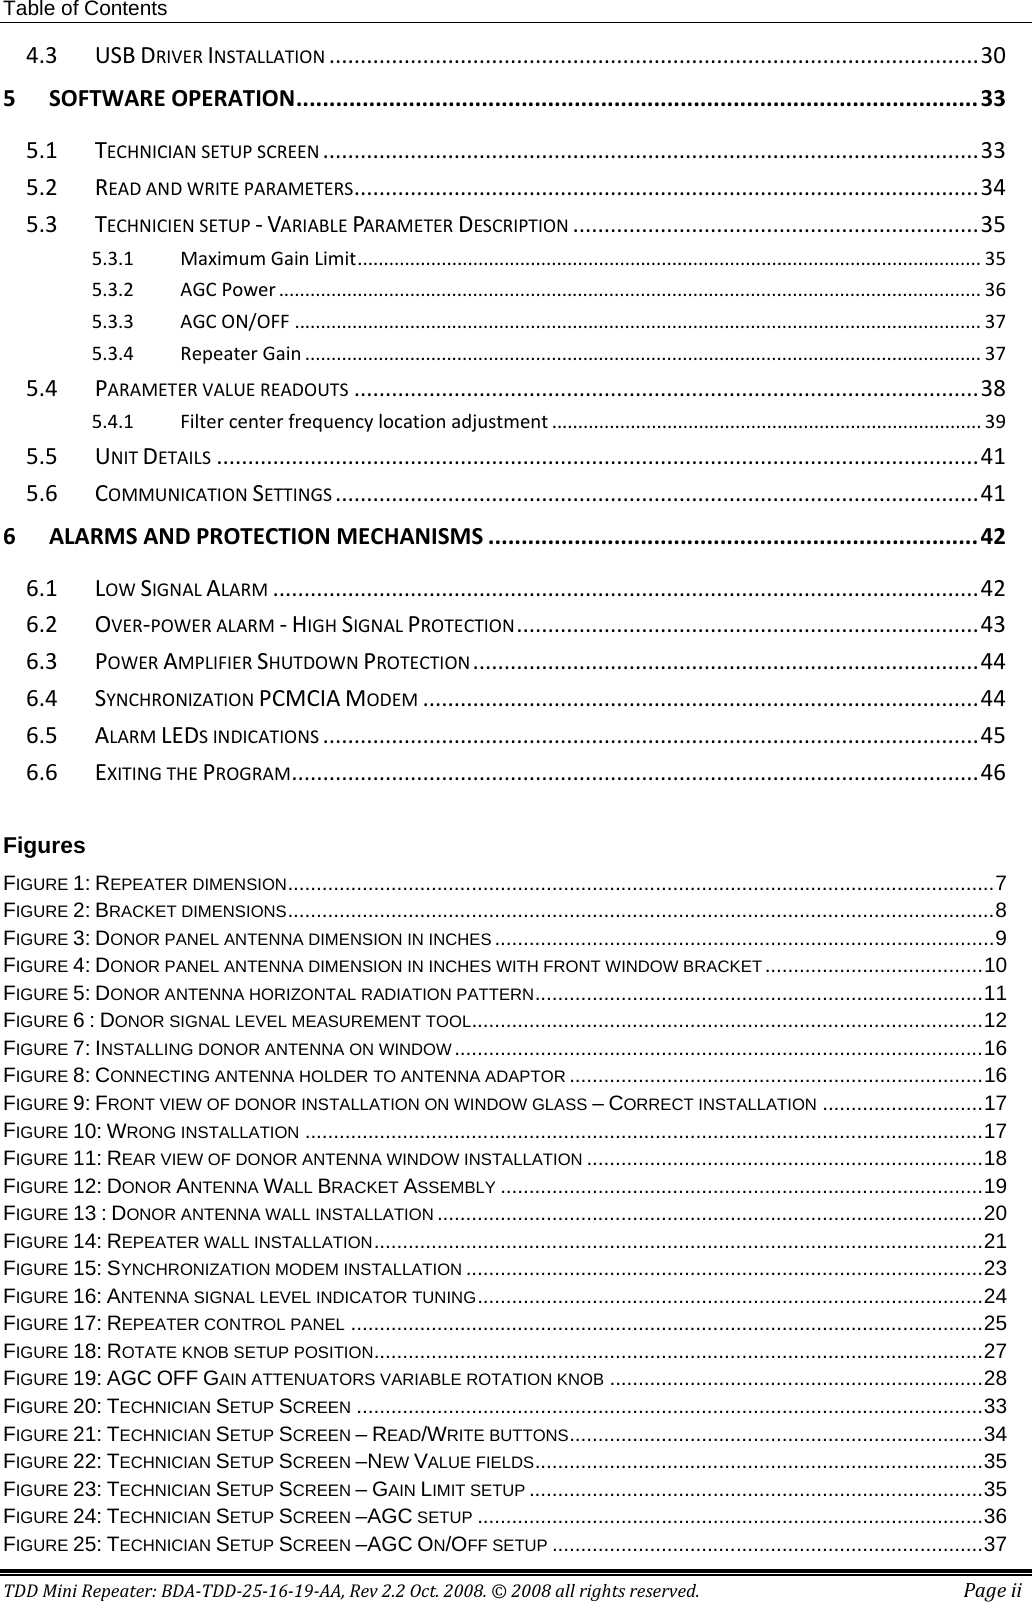 Table of Contents TDD Mini Repeater: BDA-TDD-25-16-19-AA, Rev 2.2 Oct. 2008. © 2008 all rights reserved. Page ii 4.3 USB DRIVER INSTALLATION ........................................................................................................ 30 5 SOFTWARE OPERATION ....................................................................................................... 33 5.1 TECHNICIAN SETUP SCREEN ......................................................................................................... 33 5.2 READ AND WRITE PARAMETERS .................................................................................................... 34 5.3 TECHNICIEN SETUP - VARIABLE PARAMETER DESCRIPTION ................................................................. 35 5.3.1 Maximum Gain Limit ....................................................................................................................... 35 5.3.2 AGC Power ...................................................................................................................................... 36 5.3.3 AGC ON/OFF ................................................................................................................................... 37 5.3.4 Repeater Gain ................................................................................................................................. 37 5.4 PARAMETER VALUE READOUTS .................................................................................................... 38 5.4.1 Filter center frequency location adjustment .................................................................................. 39 5.5 UNIT DETAILS .......................................................................................................................... 41 5.6 COMMUNICATION SETTINGS ....................................................................................................... 41 6 ALARMS AND PROTECTION MECHANISMS .......................................................................... 42 6.1 LOW SIGNAL ALARM ................................................................................................................. 42 6.2 OVER-POWER ALARM - HIGH SIGNAL PROTECTION .......................................................................... 43 6.3 POWER AMPLIFIER SHUTDOWN PROTECTION ................................................................................. 44 6.4 SYNCHRONIZATION PCMCIA MODEM ......................................................................................... 44 6.5 ALARM LEDS INDICATIONS ......................................................................................................... 45 6.6 EXITING THE PROGRAM .............................................................................................................. 46  Figures  FIGURE   1: REPEATER DIMENSION ........................................................................................................................... 7FIGURE   2: BRACKET DIMENSIONS ........................................................................................................................... 8FIGURE   3: DONOR PANEL ANTENNA DIMENSION IN INCHES ....................................................................................... 9FIGURE   4: DONOR PANEL ANTENNA DIMENSION IN INCHES WITH FRONT WINDOW BRACKET ...................................... 10FIGURE   5: DONOR ANTENNA HORIZONTAL RADIATION PATTERN .............................................................................. 11FIGURE   6 : DONOR SIGNAL LEVEL MEASUREMENT TOOL ......................................................................................... 12FIGURE   7: INSTALLING DONOR ANTENNA ON WINDOW ............................................................................................ 16FIGURE   8: CONNECTING ANTENNA HOLDER TO ANTENNA ADAPTOR ........................................................................ 16FIGURE   9: FRONT VIEW OF DONOR INSTALLATION ON WINDOW GLASS – CORRECT INSTALLATION ............................ 17FIGURE   10: WRONG INSTALLATION ...................................................................................................................... 17FIGURE   11: REAR VIEW OF DONOR ANTENNA WINDOW INSTALLATION ..................................................................... 18FIGURE   12: DONOR ANTENNA WALL BRACKET ASSEMBLY .................................................................................... 19FIGURE   13 : DONOR ANTENNA WALL INSTALLATION ............................................................................................... 20FIGURE   14: REPEATER WALL INSTALLATION .......................................................................................................... 21FIGURE   15: SYNCHRONIZATION MODEM INSTALLATION .......................................................................................... 23FIGURE   16: ANTENNA SIGNAL LEVEL INDICATOR TUNING ........................................................................................ 24FIGURE   17: REPEATER CONTROL PANEL .............................................................................................................. 25FIGURE   18: ROTATE KNOB SETUP POSITION .......................................................................................................... 27FIGURE   19: AGC OFF GAIN ATTENUATORS VARIABLE ROTATION KNOB ................................................................. 28FIGURE   20: TECHNICIAN SETUP SCREEN ............................................................................................................. 33FIGURE   21: TECHNICIAN SETUP SCREEN – READ/WRITE BUTTONS ........................................................................ 34FIGURE   22: TECHNICIAN SETUP SCREEN –NEW VALUE FIELDS .............................................................................. 35FIGURE   23: TECHNICIAN SETUP SCREEN – GAIN LIMIT SETUP ............................................................................... 35FIGURE   24: TECHNICIAN SETUP SCREEN –AGC SETUP ........................................................................................ 36FIGURE   25: TECHNICIAN SETUP SCREEN –AGC ON/OFF SETUP ........................................................................... 37